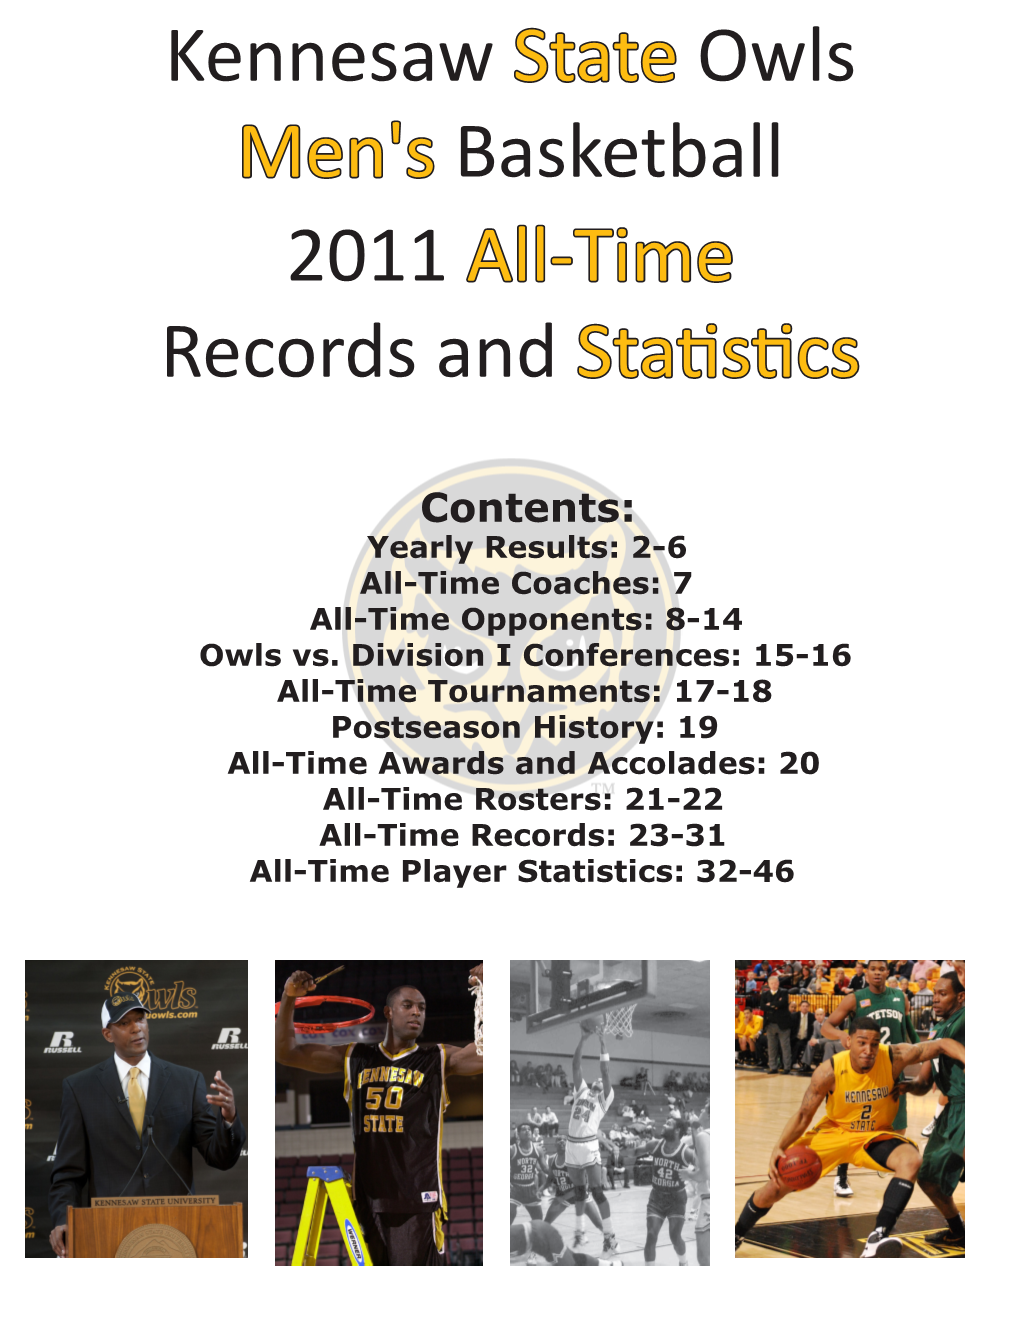 Kennesaw State Owls Men's Basketball 2011 All-Time Records and Statistics